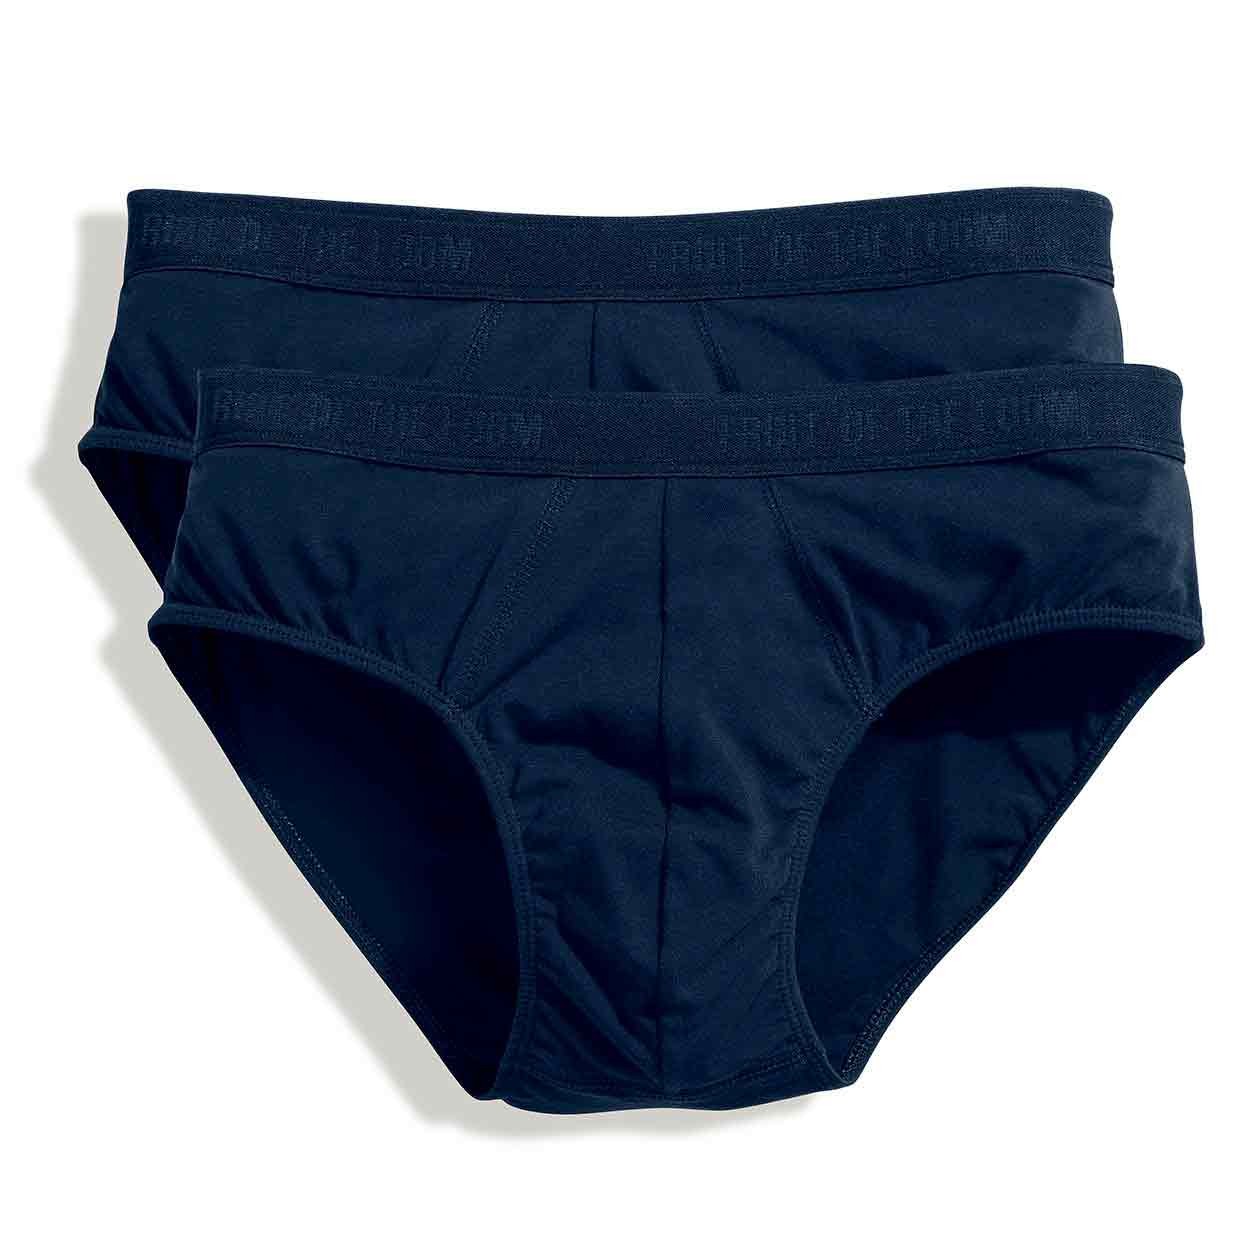 Fruit of the Loom SS302 Classic Sport Brief - Underwear